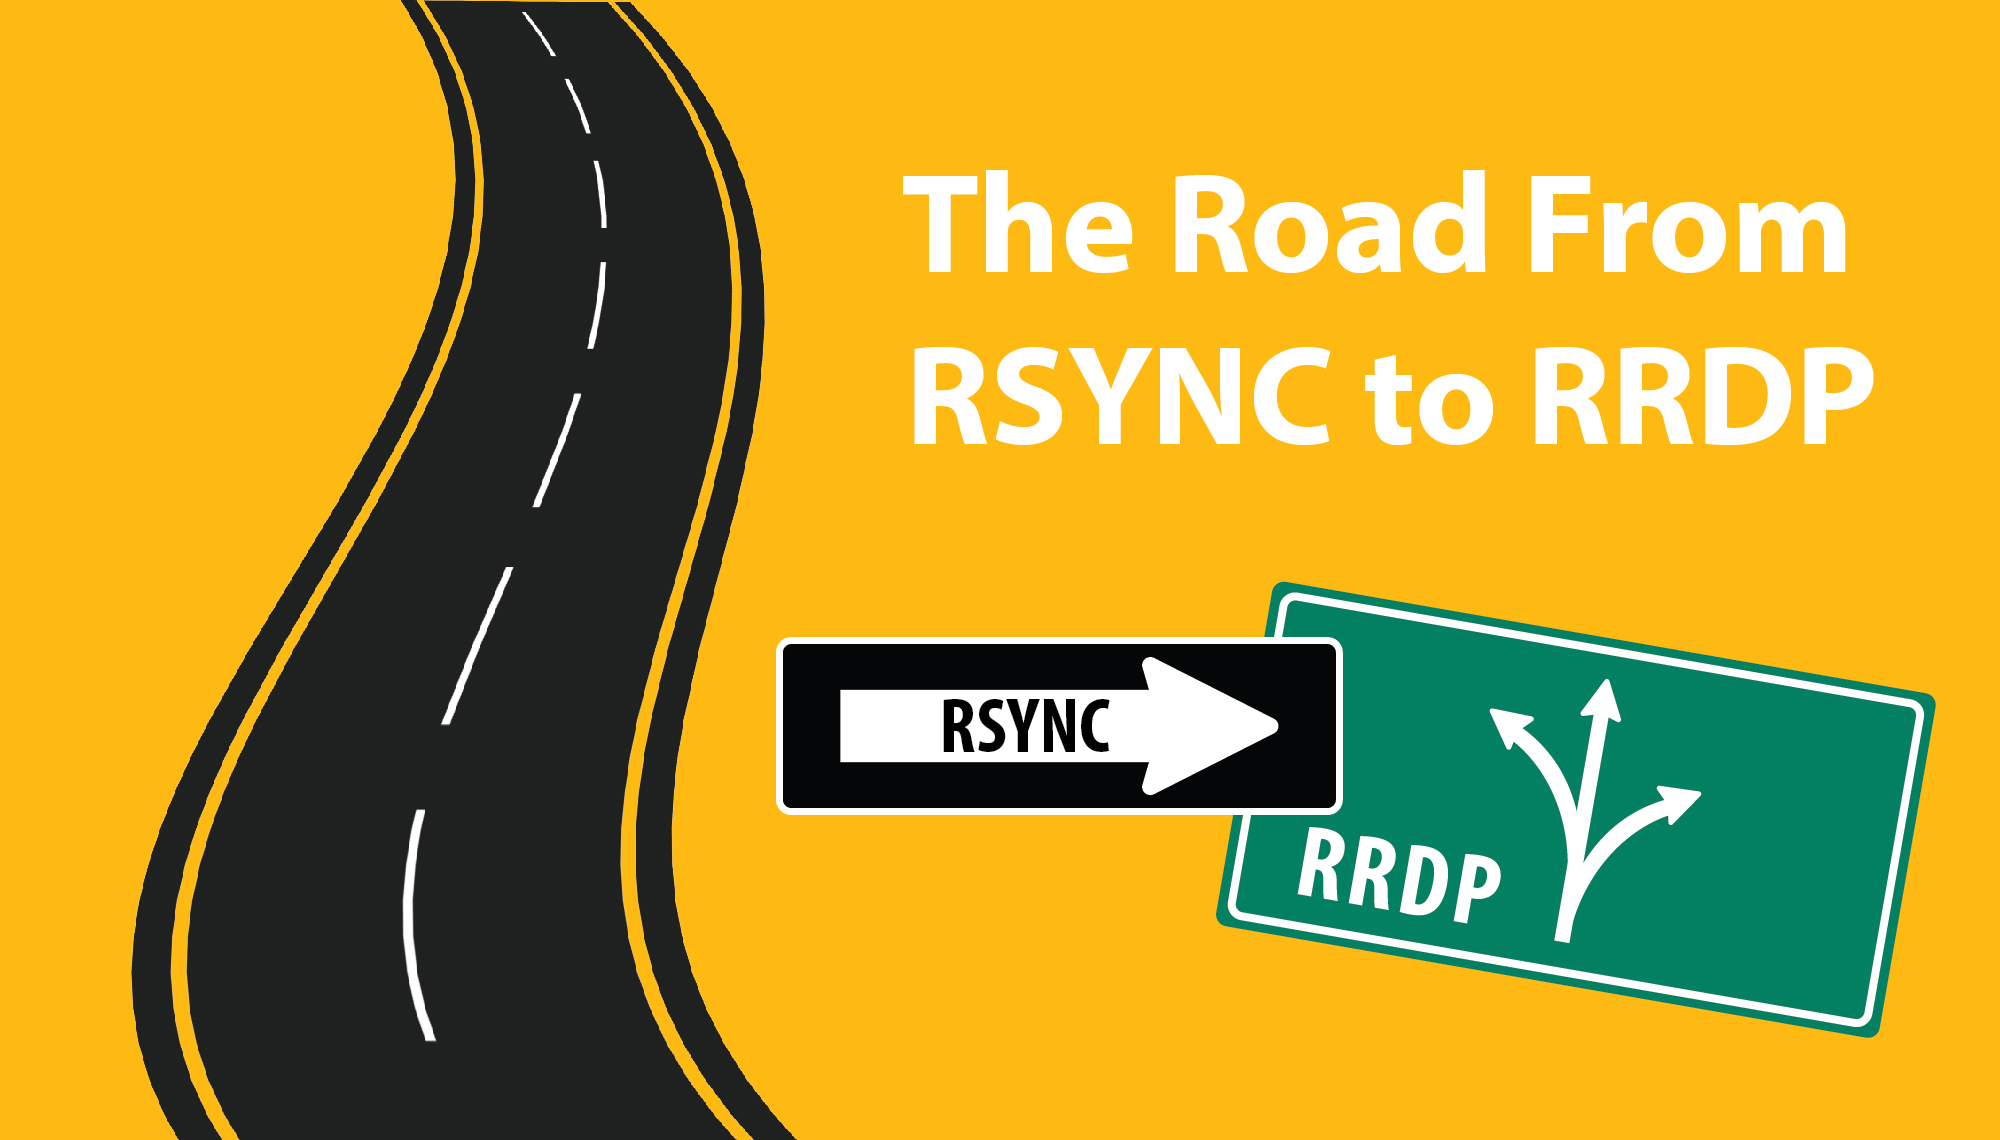 The Road From RSYNC to RRDP